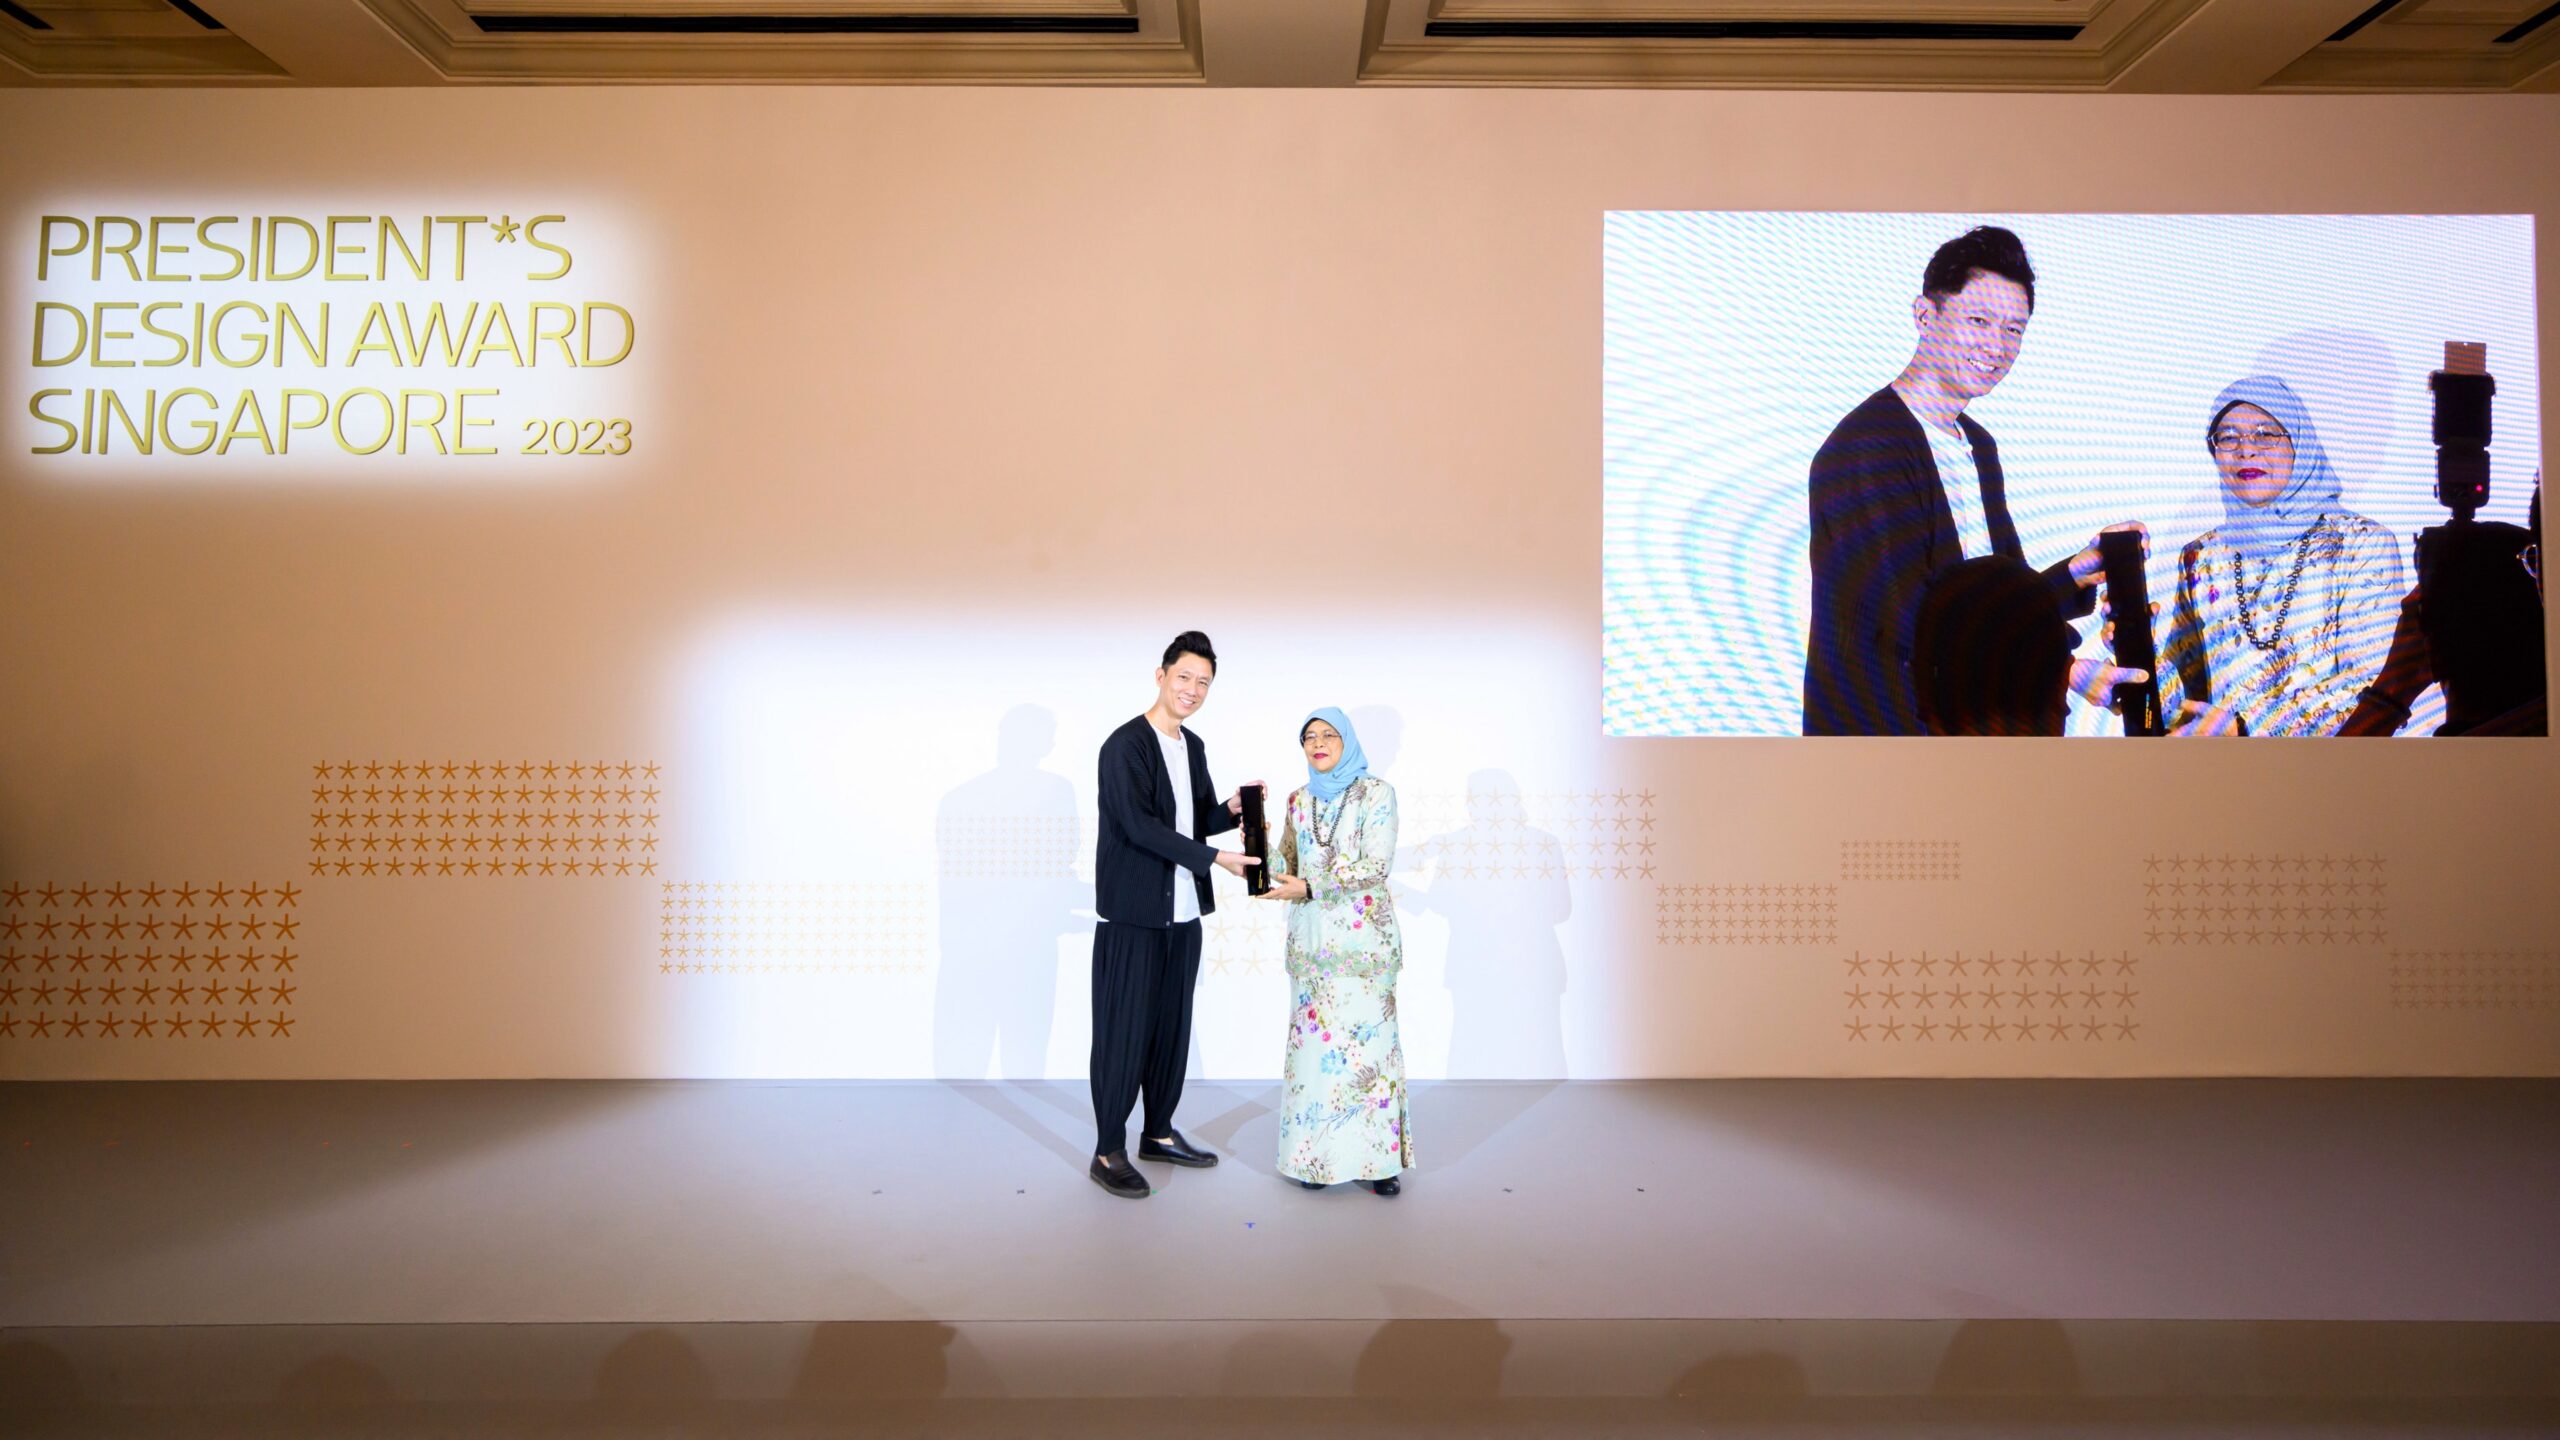 Assoc Prof Tan was presented with the award at the Istana by President Halimah Yacob. (Photo: Gan Jia Jun, courtesy of DesignSingapore Council and Urban Redevelopment Authority